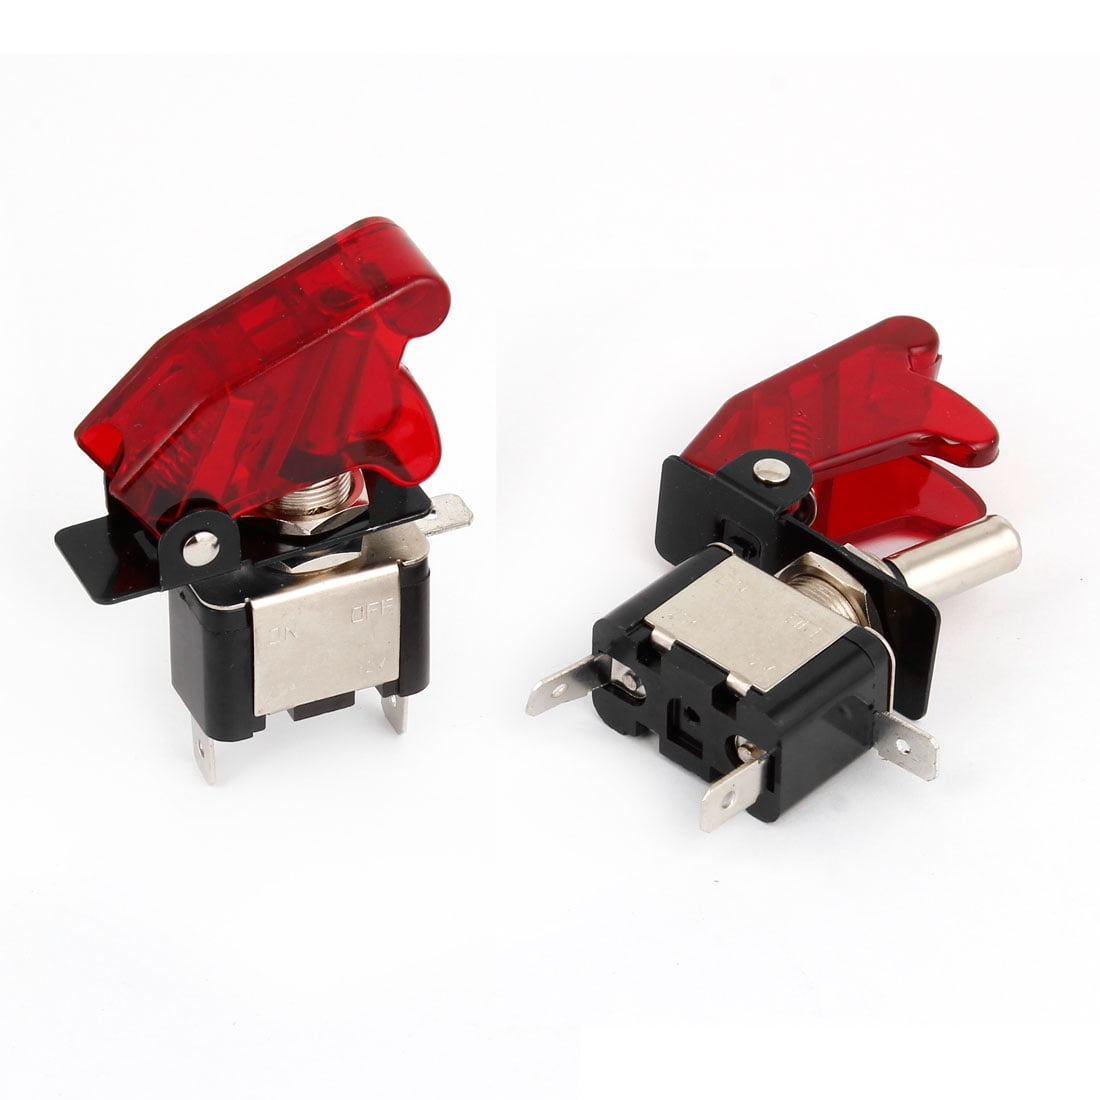 Details about   12V 20A Car Truck Auto Cover LED Light SPST Toggle Rocker Switch Control On/Off 